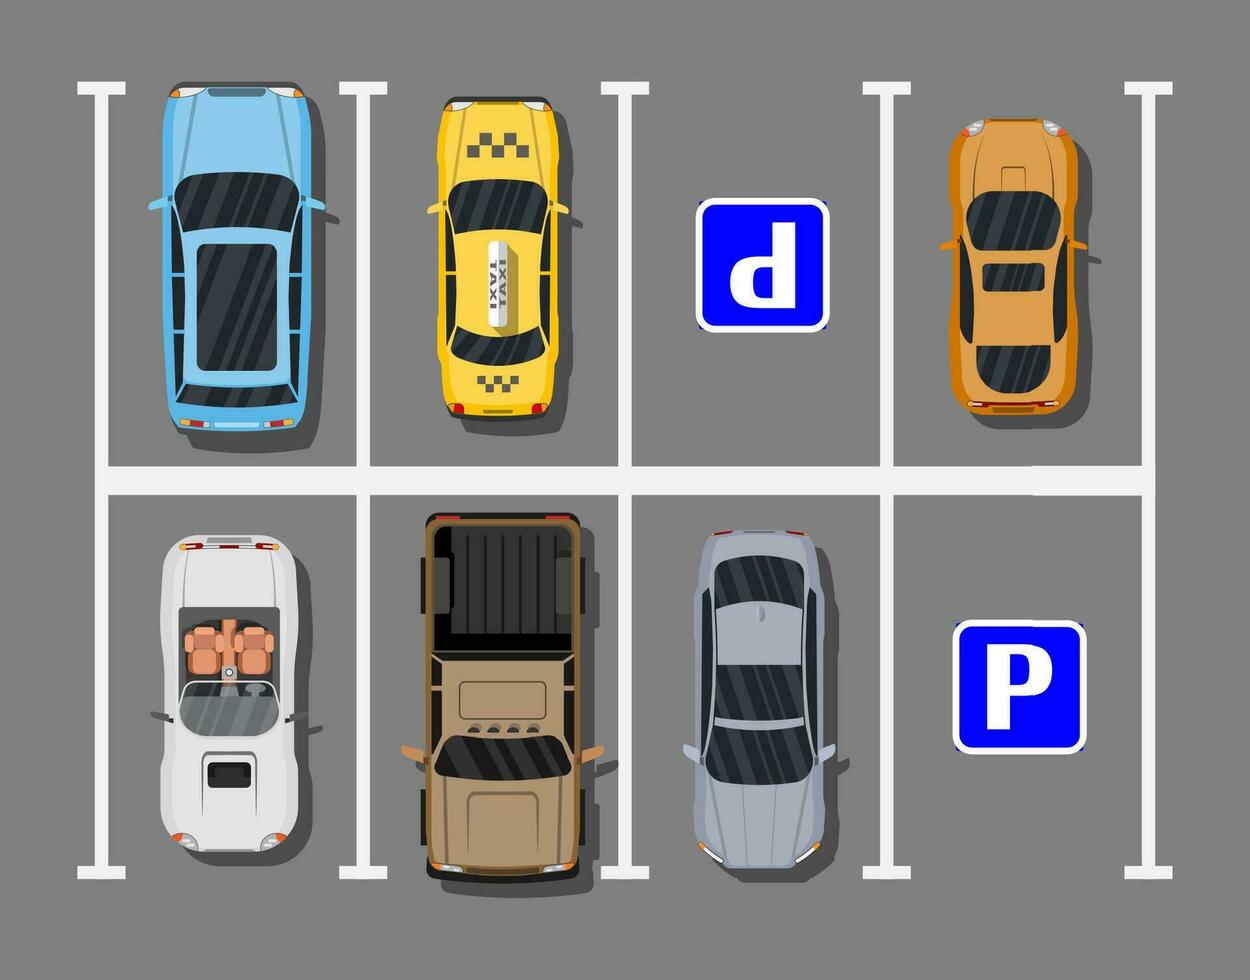 City parking lot with different cars. Shortage parking spaces. Parking zone top view with various vehicles. Sedan, roadster, suv, sport car, pickup. Vector illustration in flat style